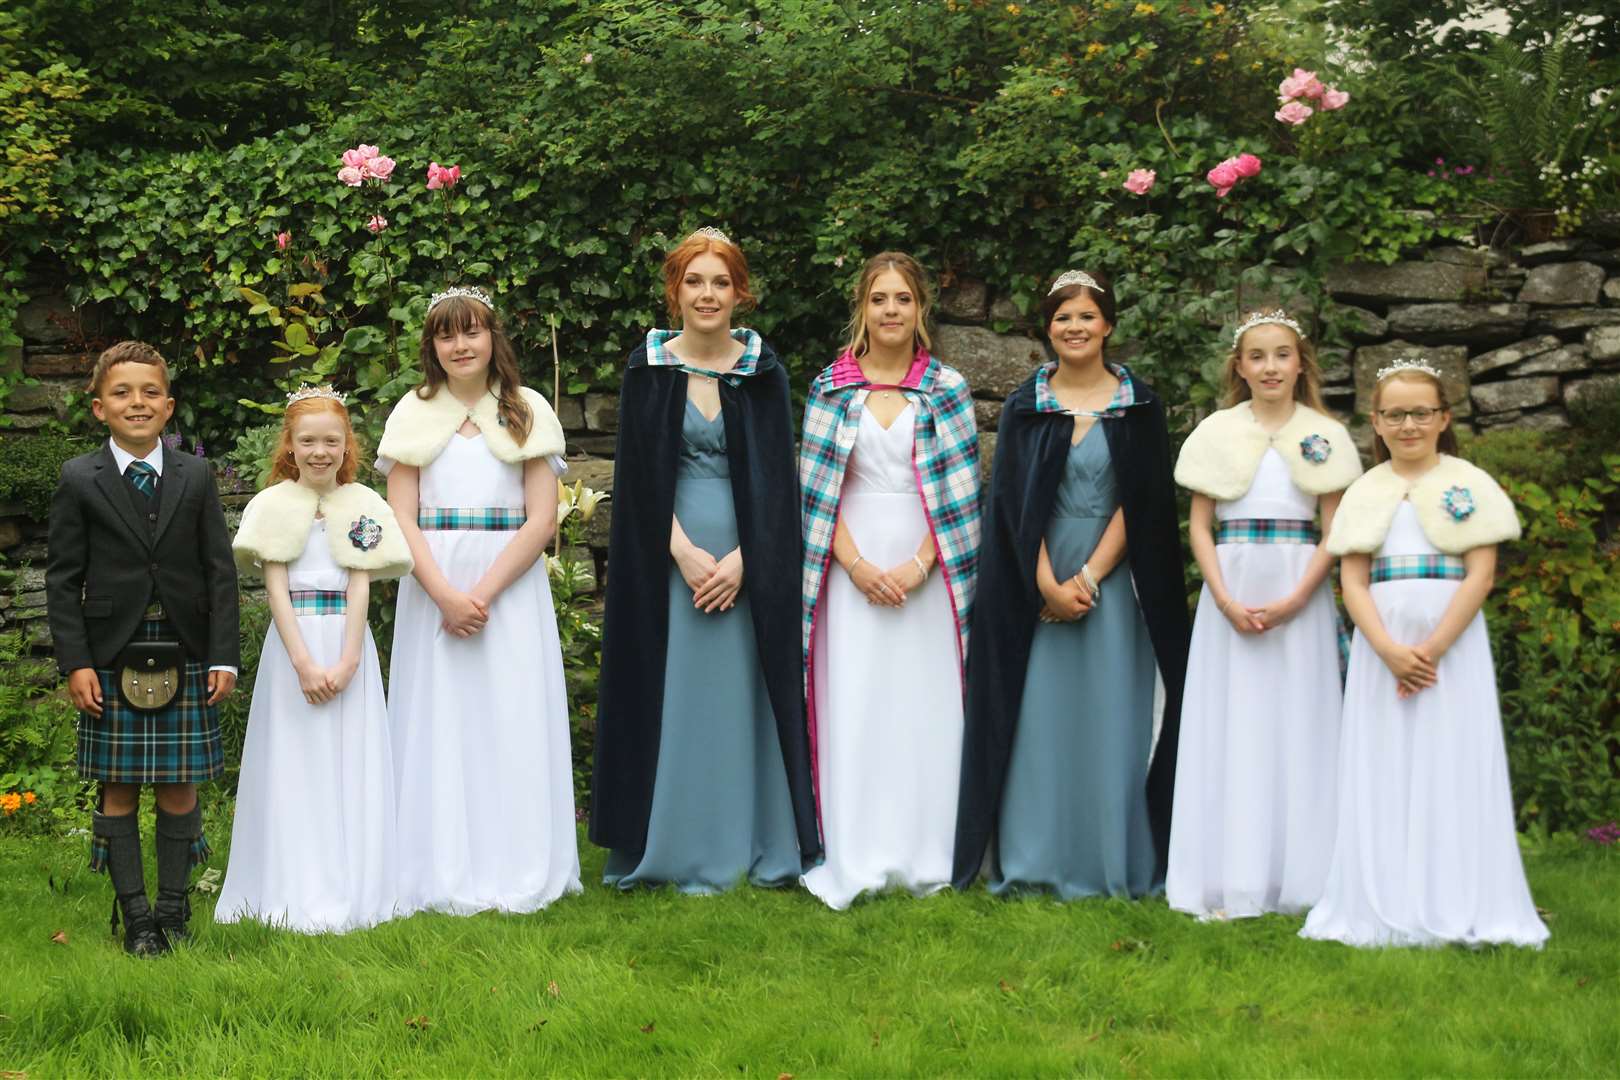 Wick gala queen Beth Dunnett with her attendants Devin Stuart and Lauryn Miller and the gala court. Picture: Eswyl Fell